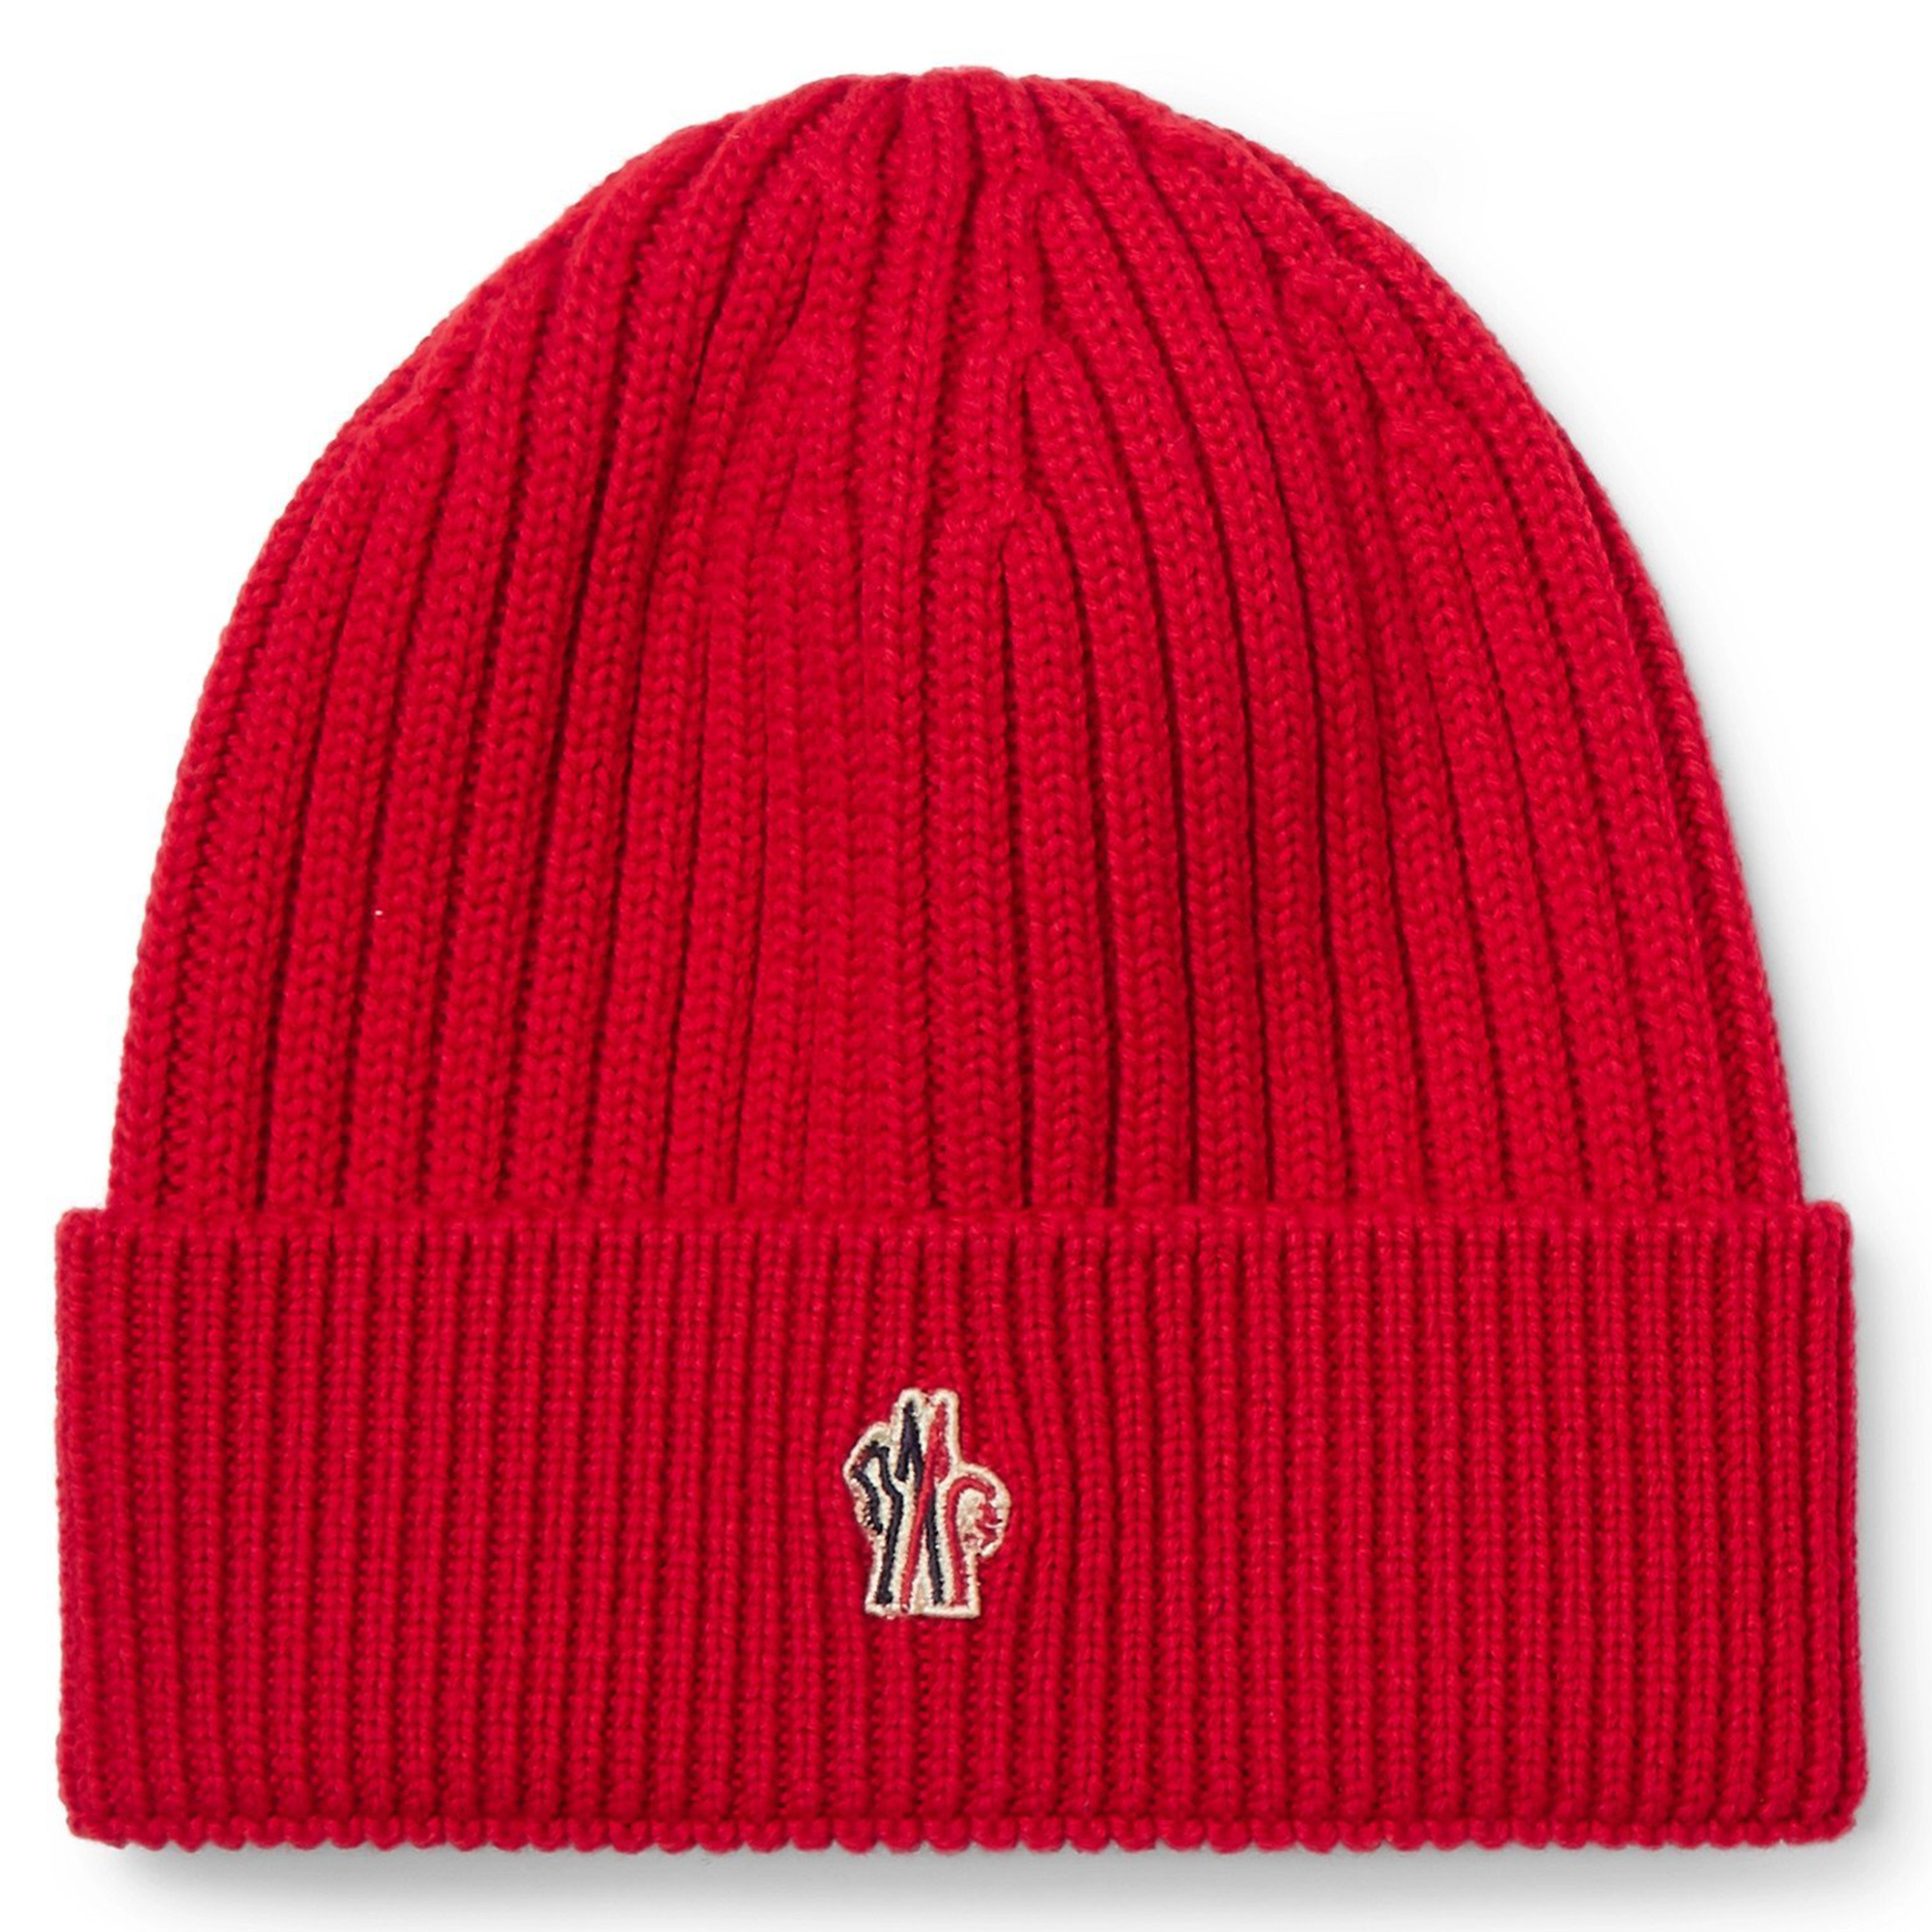 Moncler Grenoble Hat Top Sellers, 58% OFF | www.ingeniovirtual.com